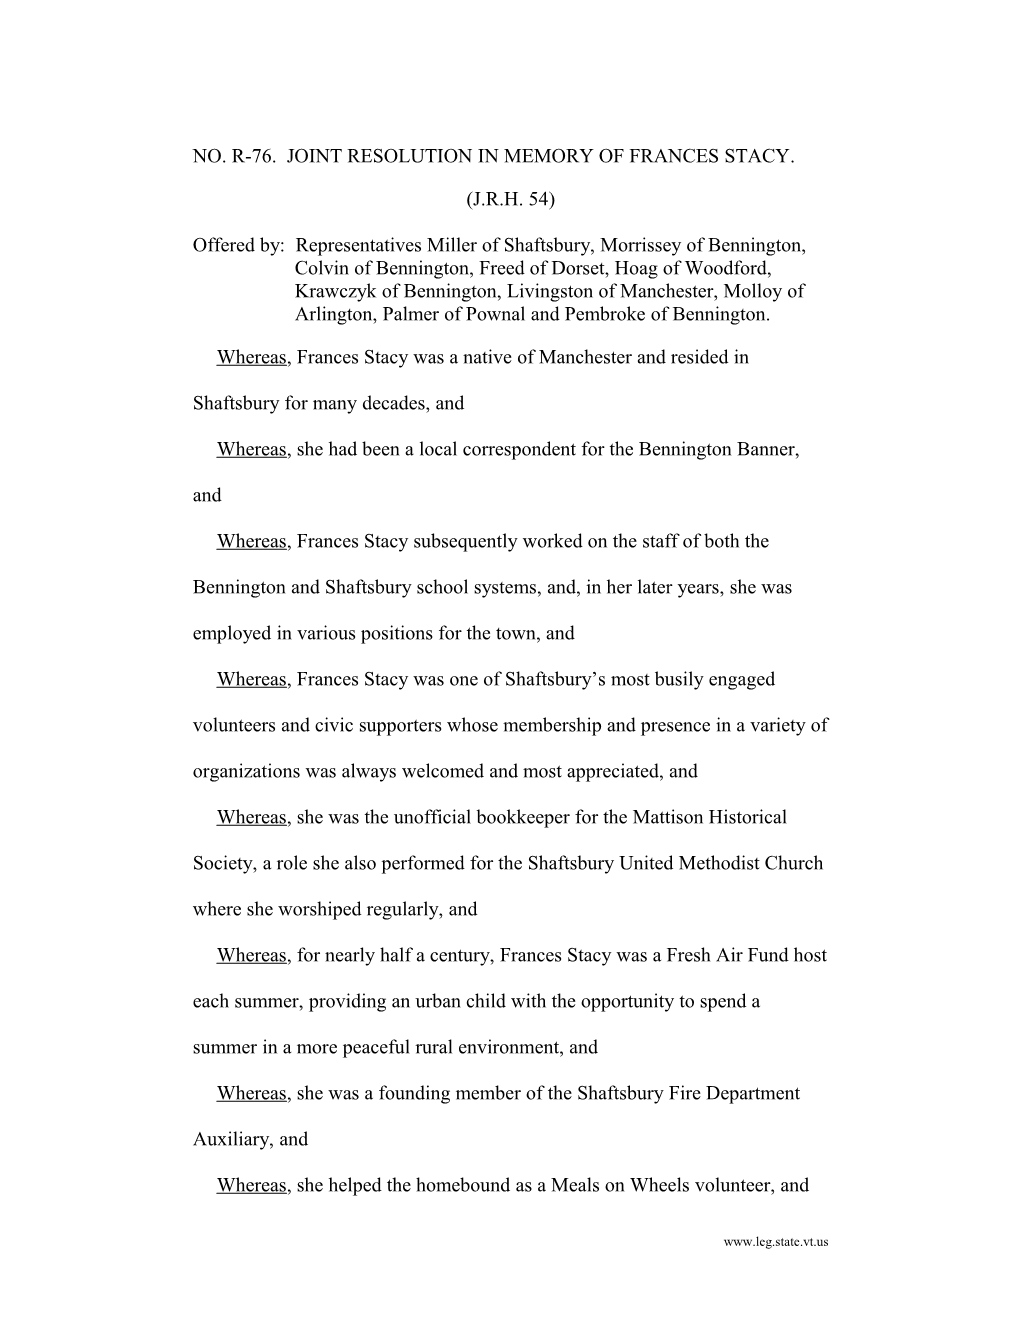 NO. R-76. JOINT RESOLUTION in Memory of Frances Stacy